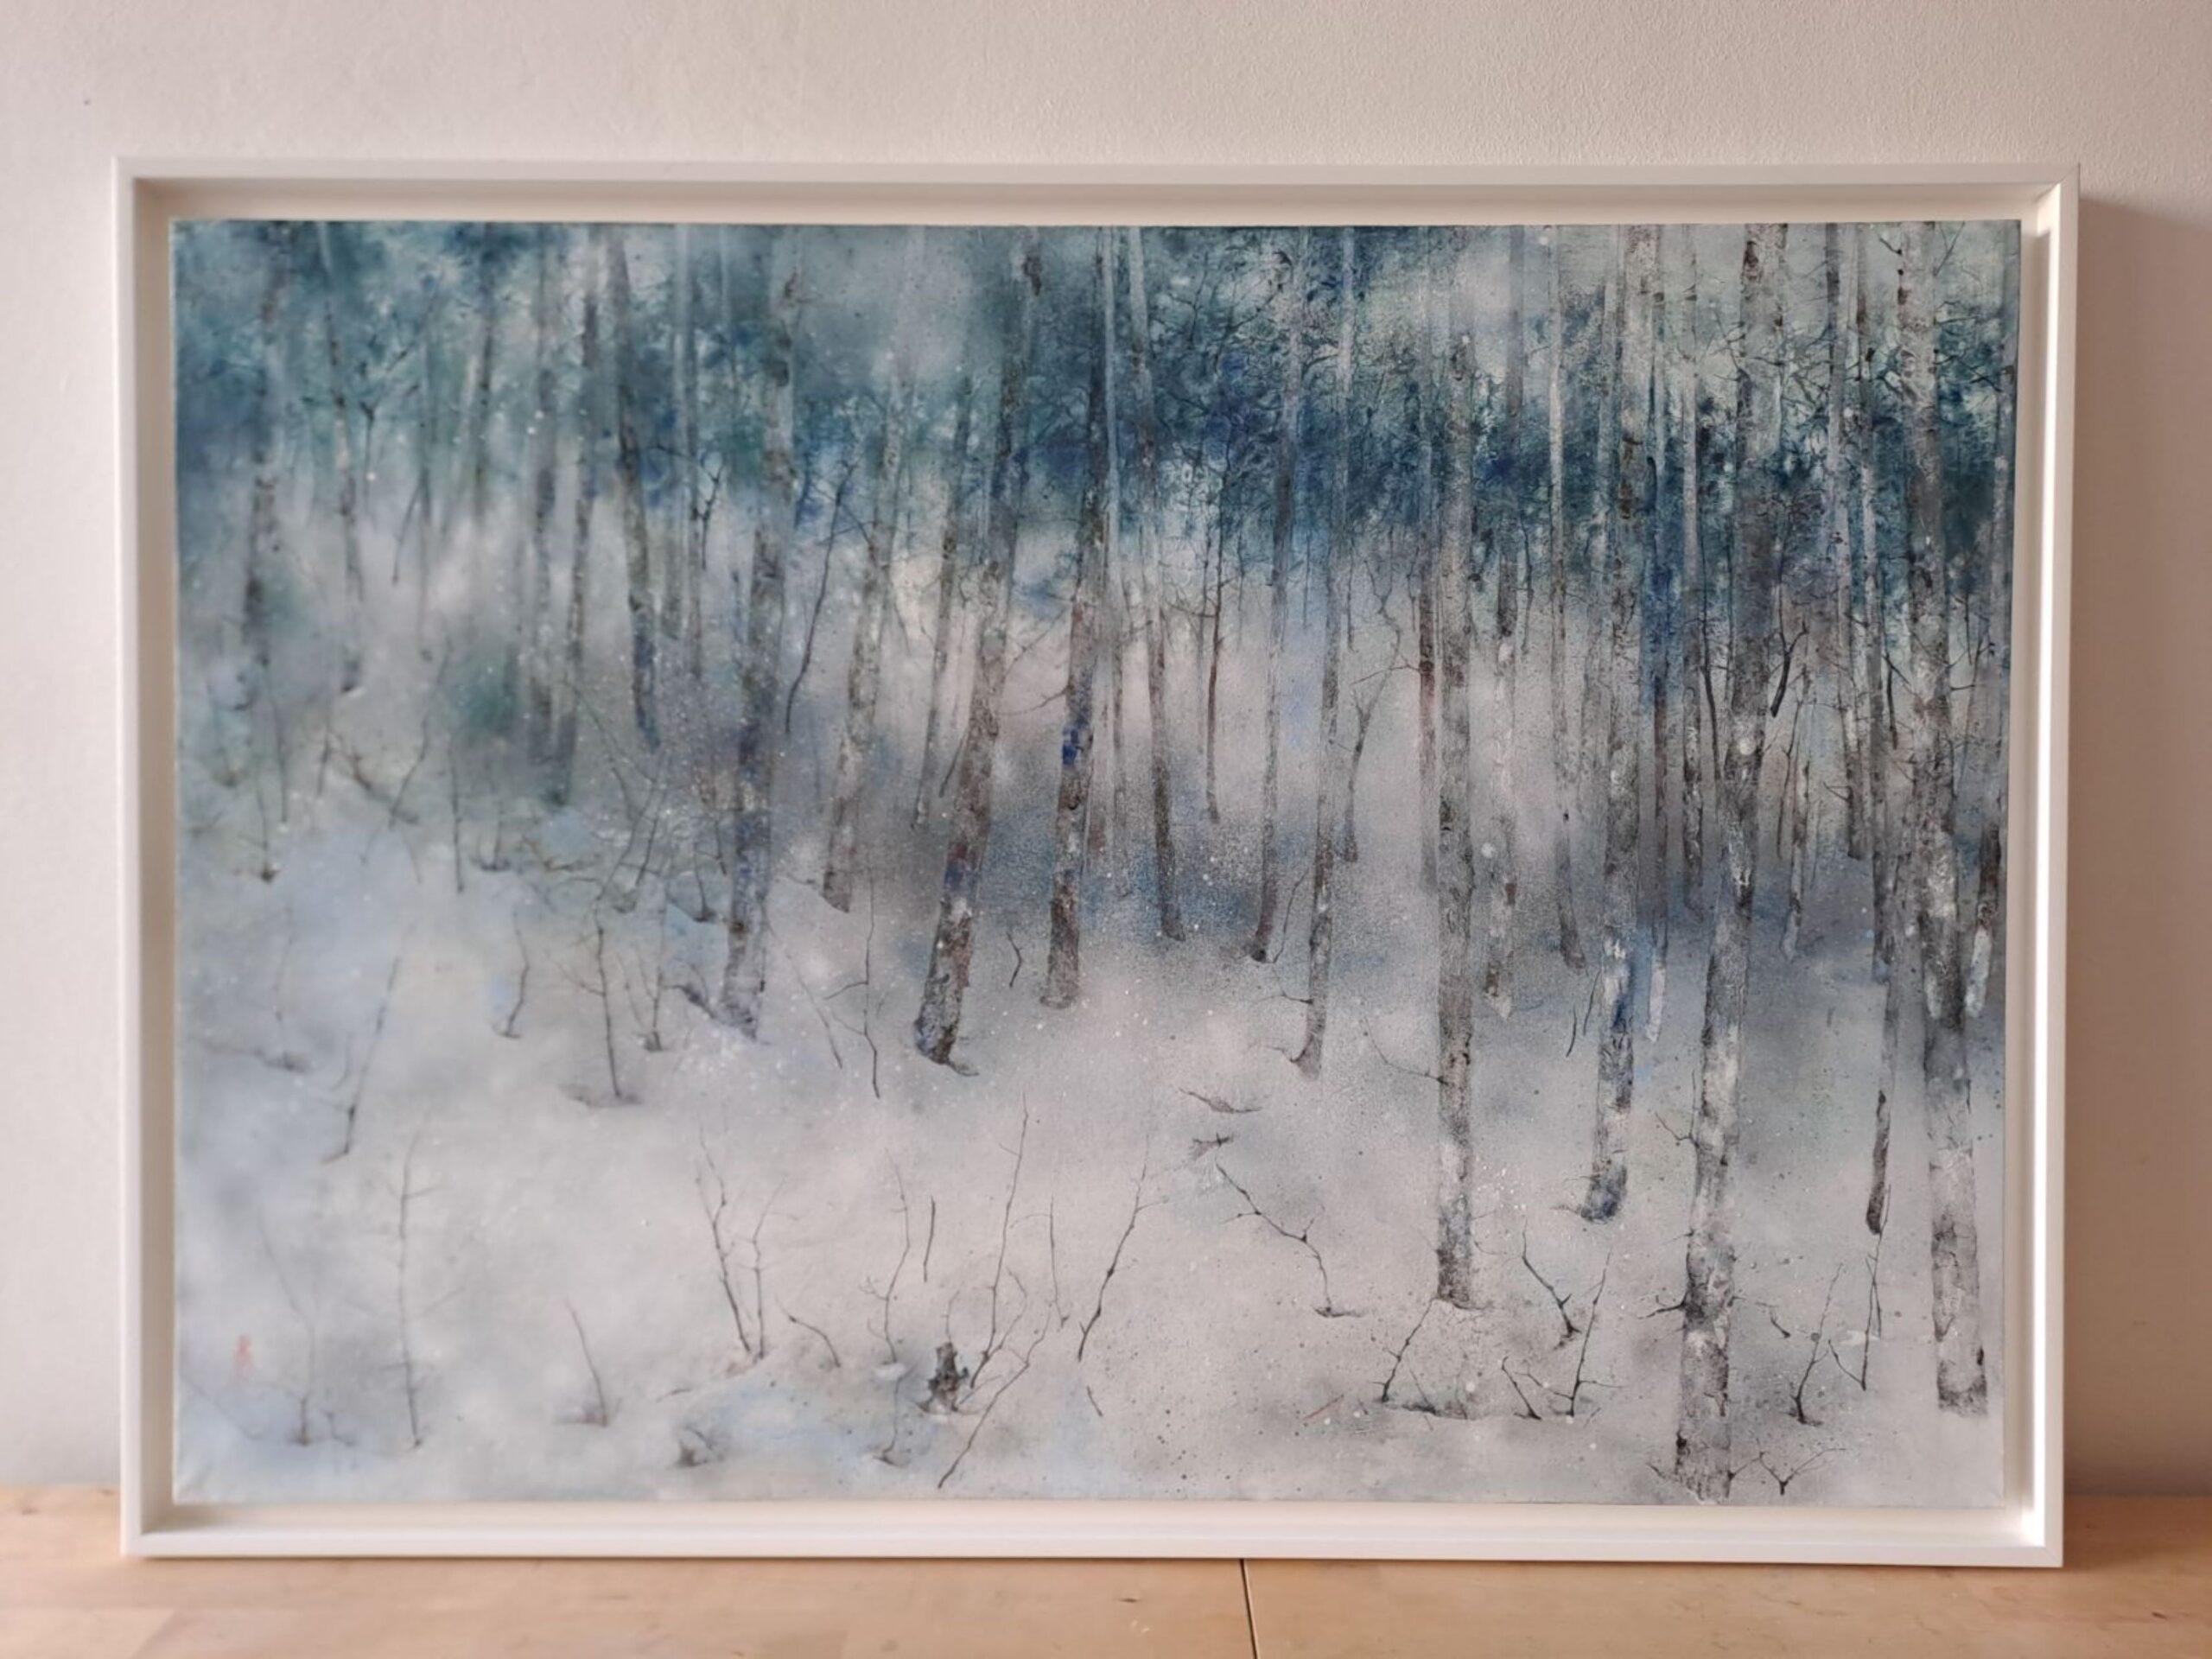 Solitude is a unique painting by contemporary artist Yiching Chen. The painting is made with mineral pigments and silver leaf on Japanese paper mounted on wood, dimensions are 70 × 100 cm (27.6 × 39.4 in). Dimensions of the framed artwork (white